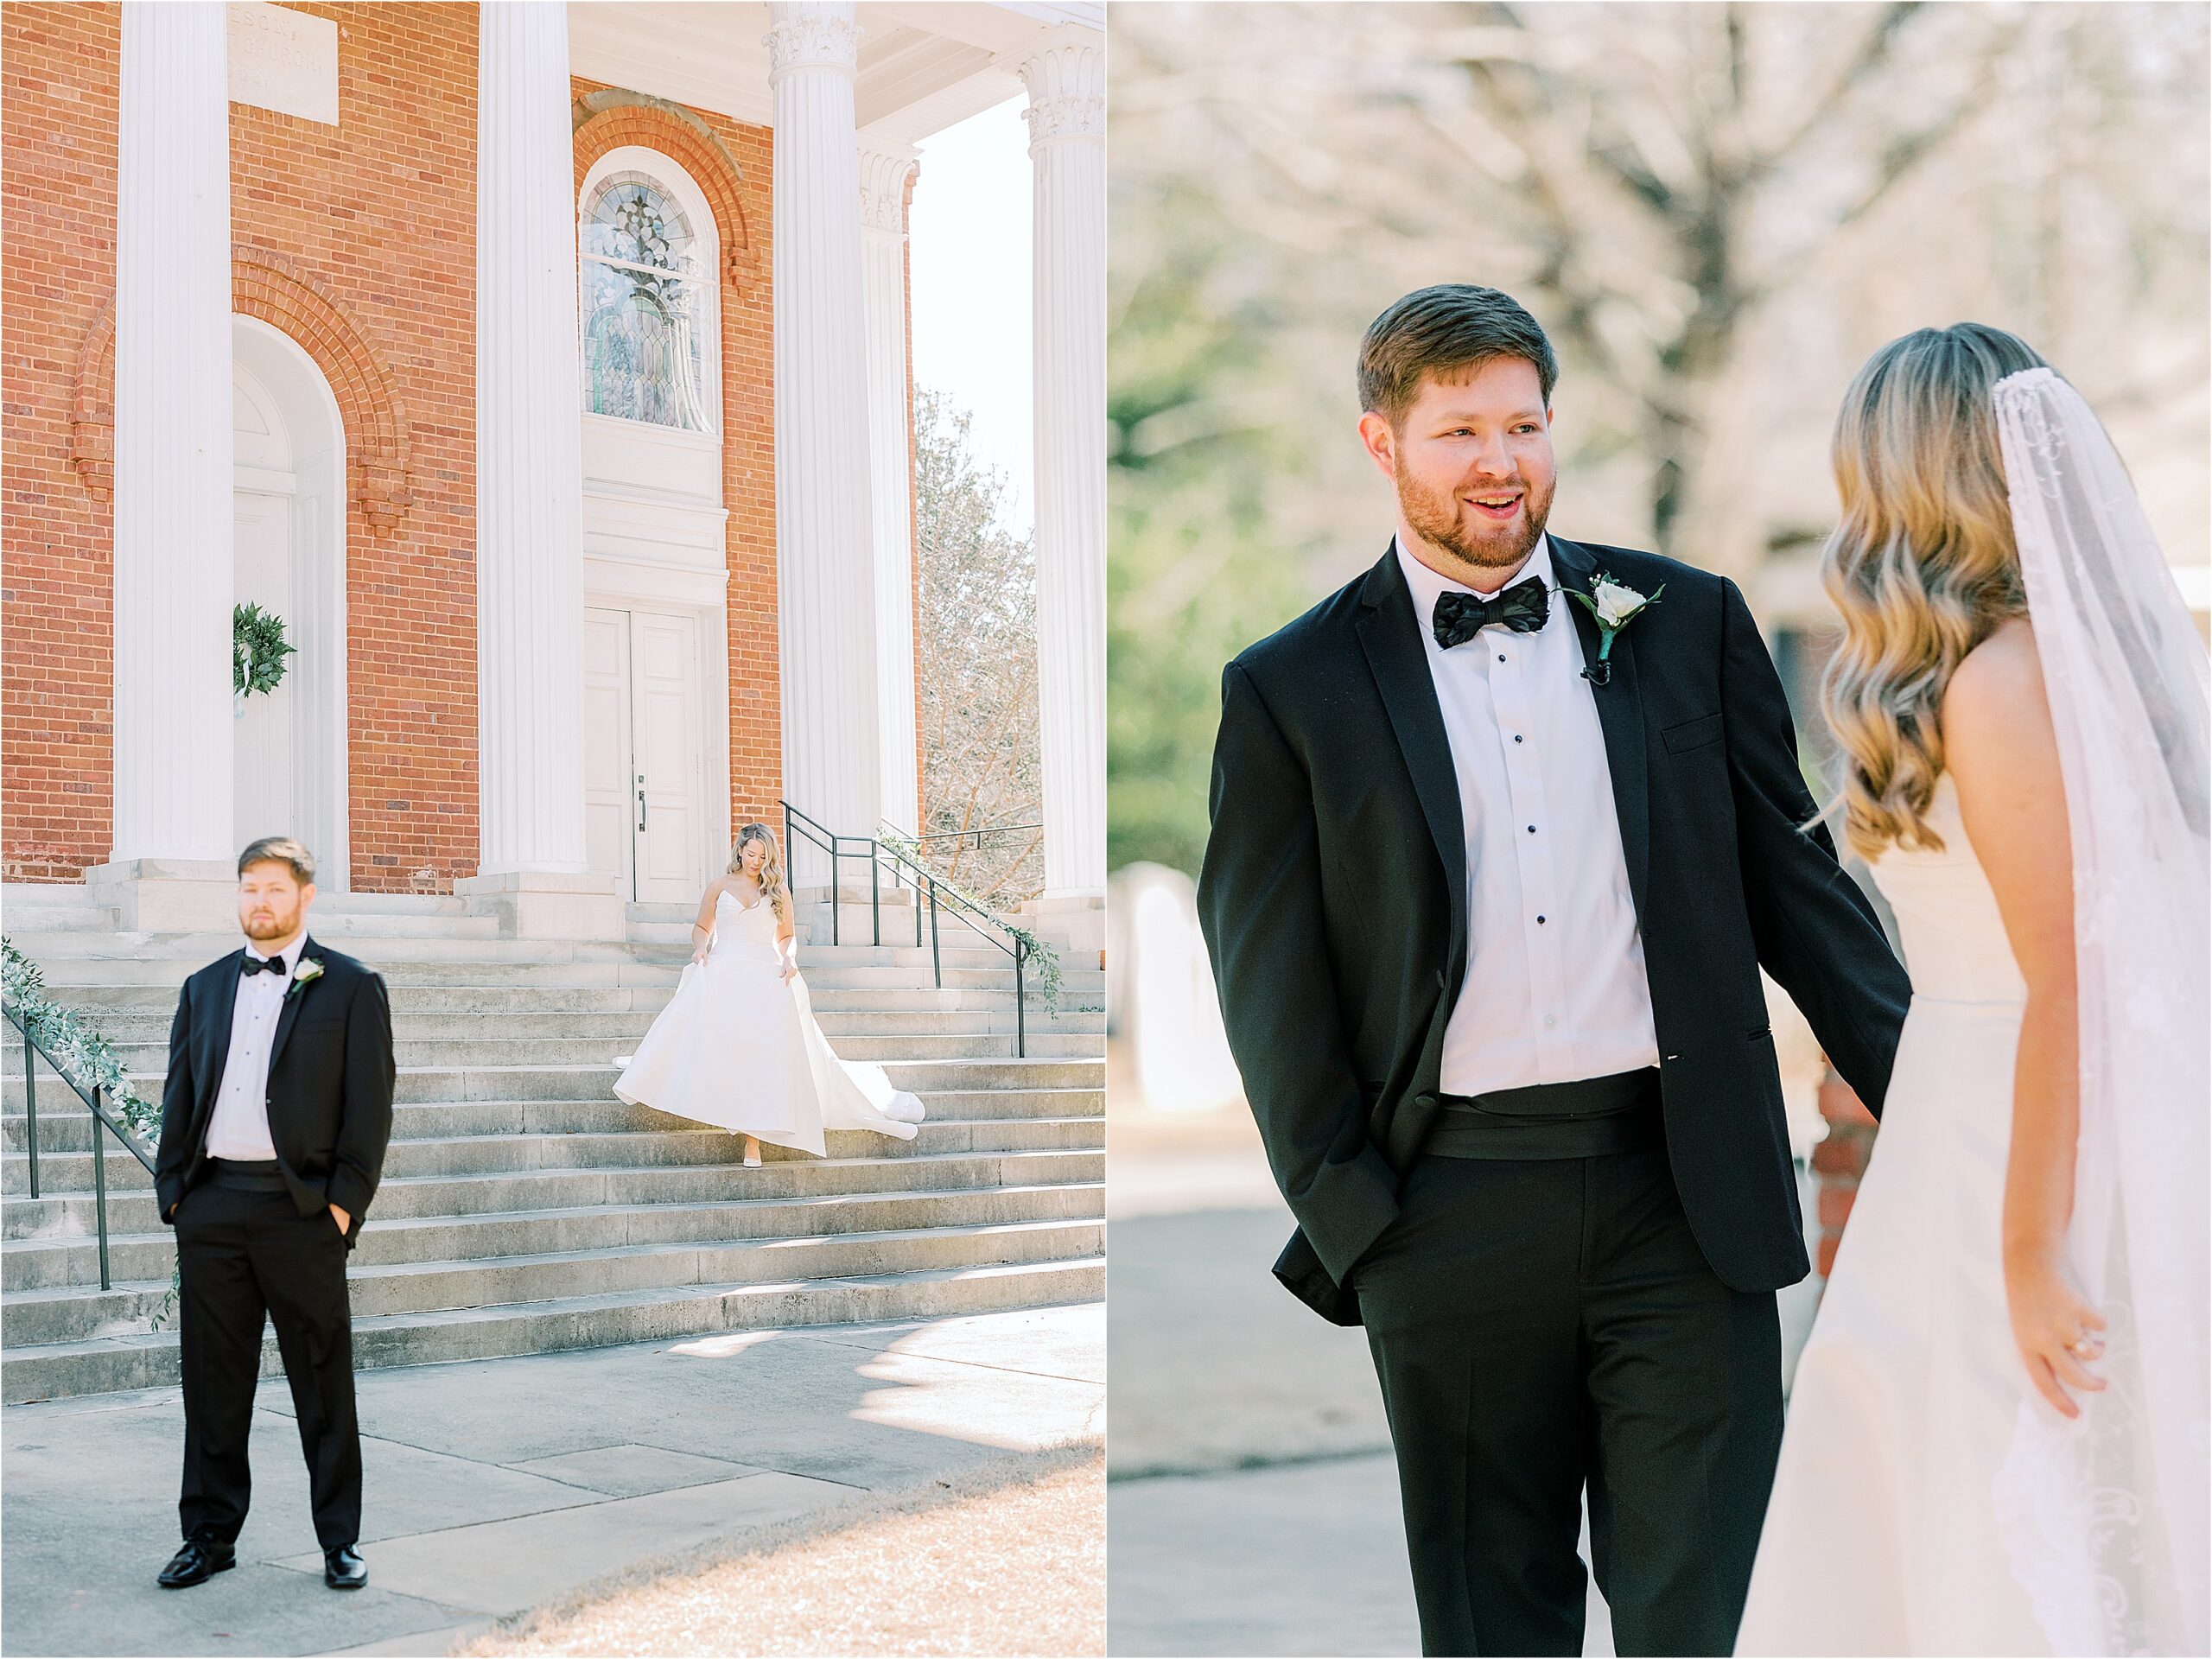 Bride walking down church steps to see her groom for the first time.